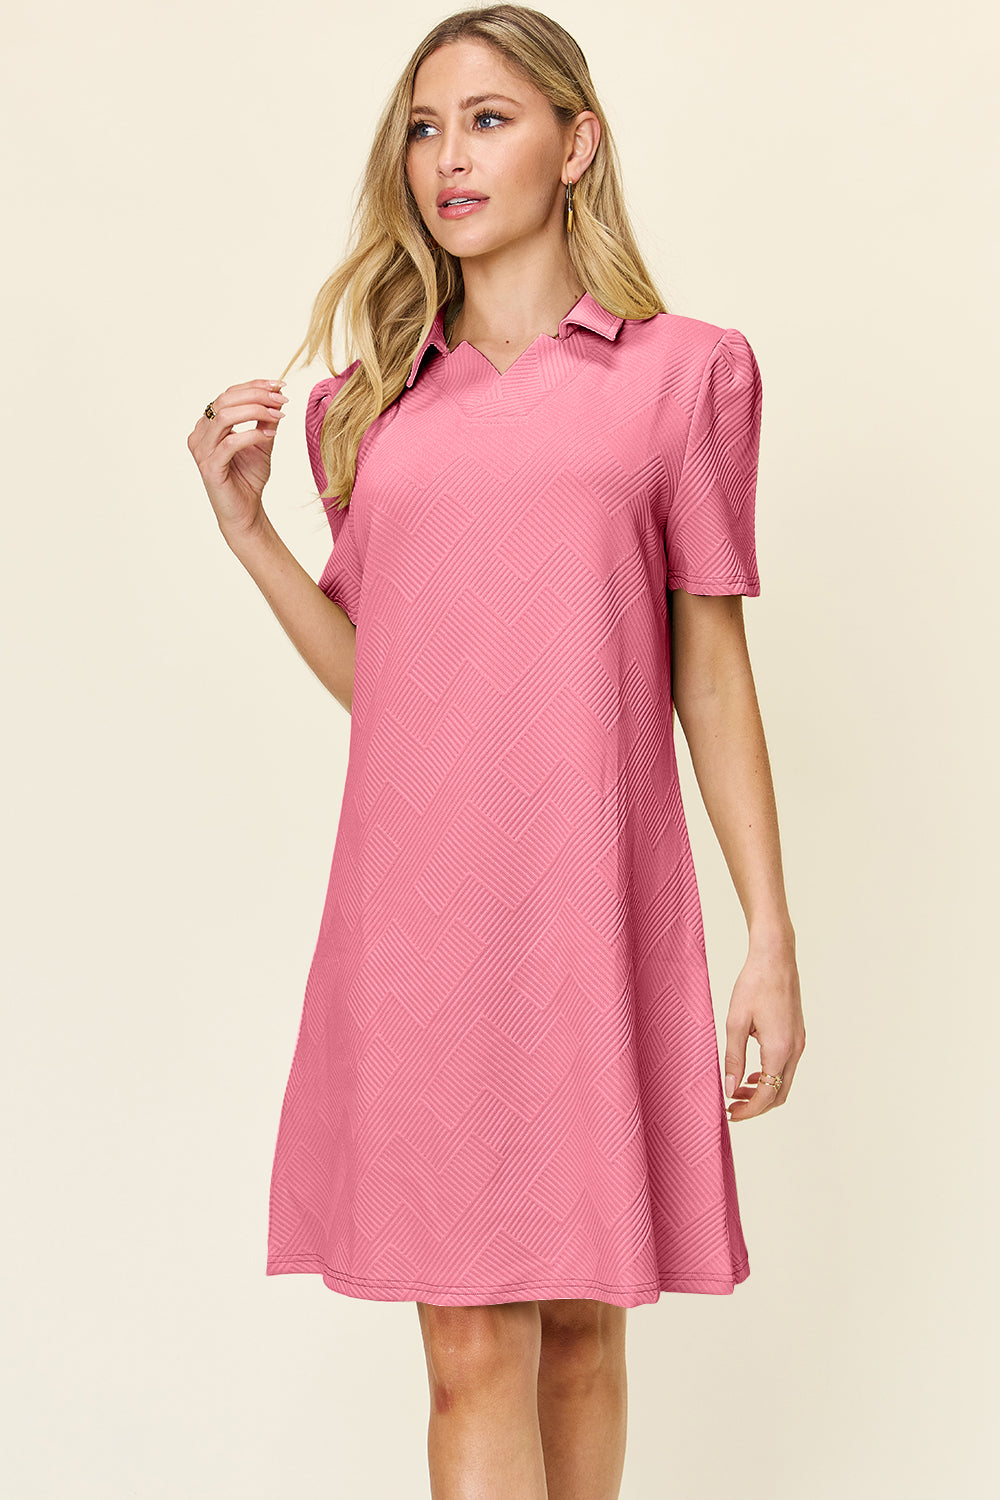 Double Take Full Size Texture Collared Neck Short Sleeve Dress Pink S